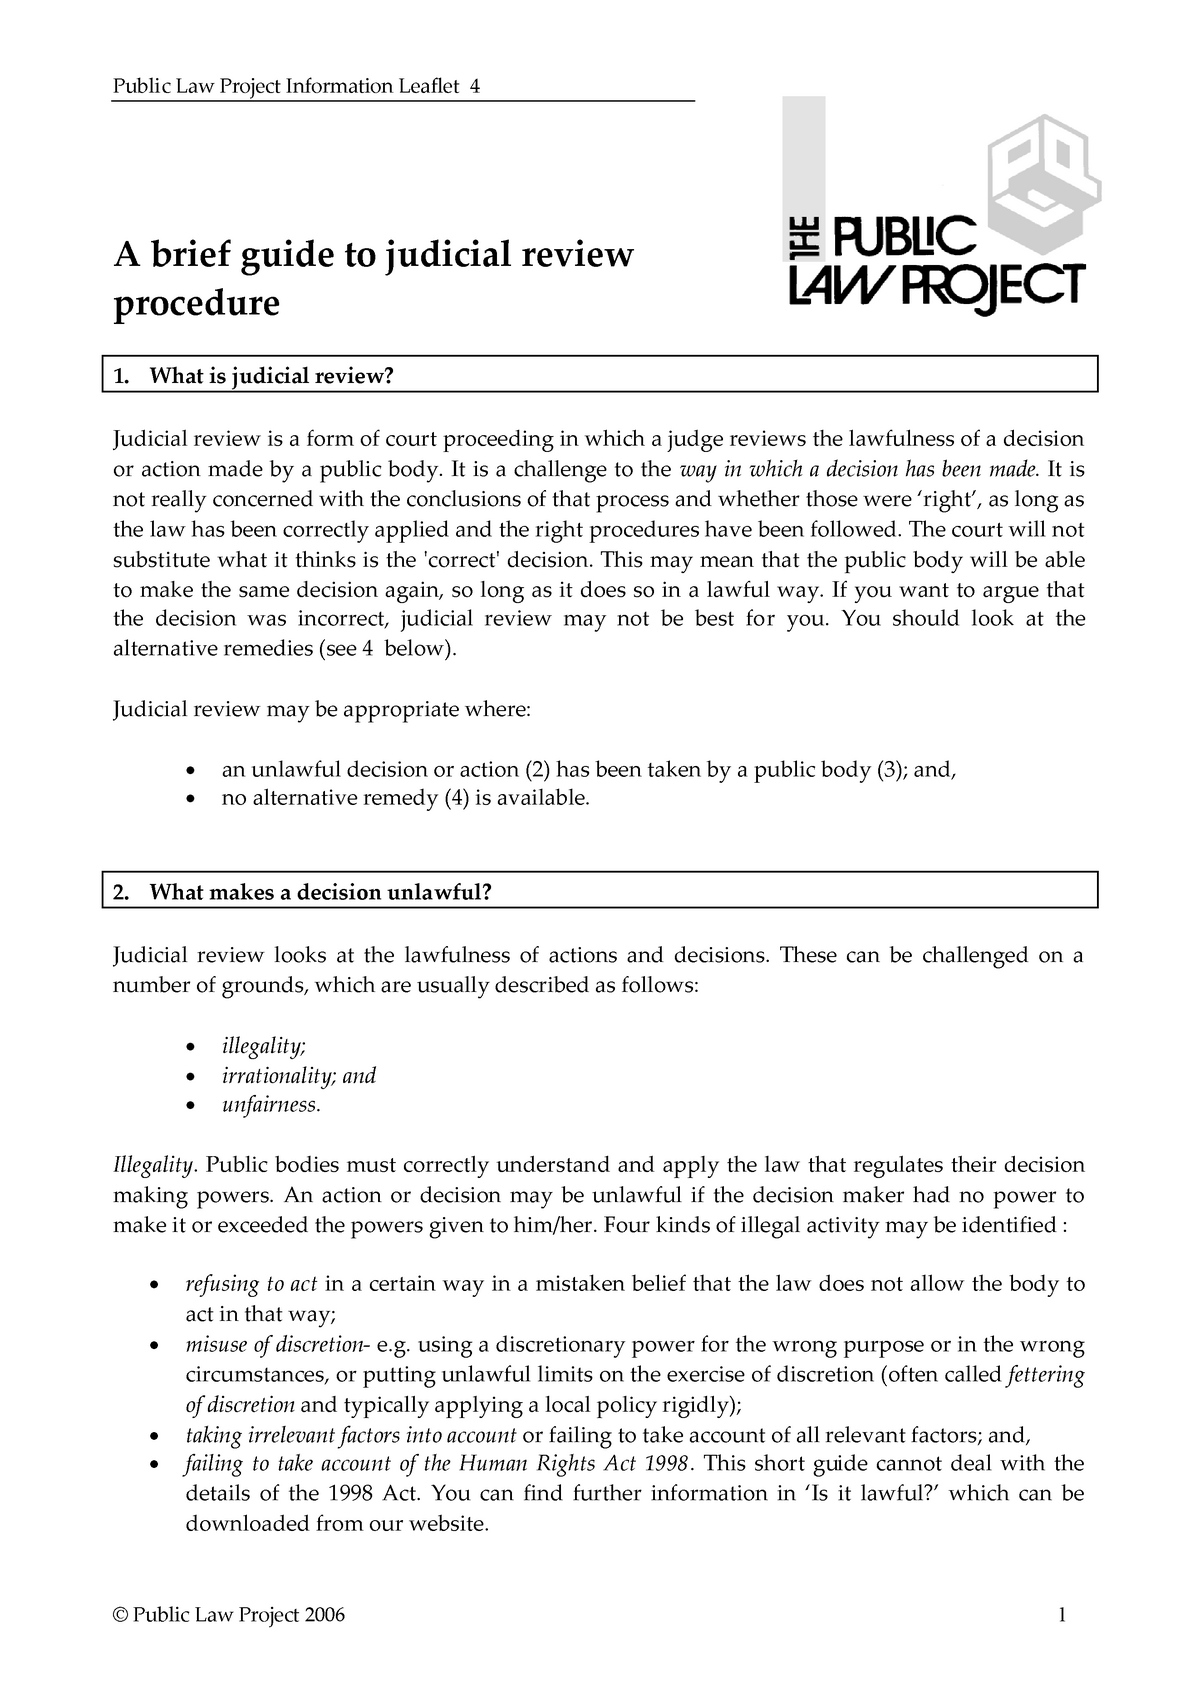 judical-review-notes-n-a-a-brief-guide-to-judicial-review-procedure